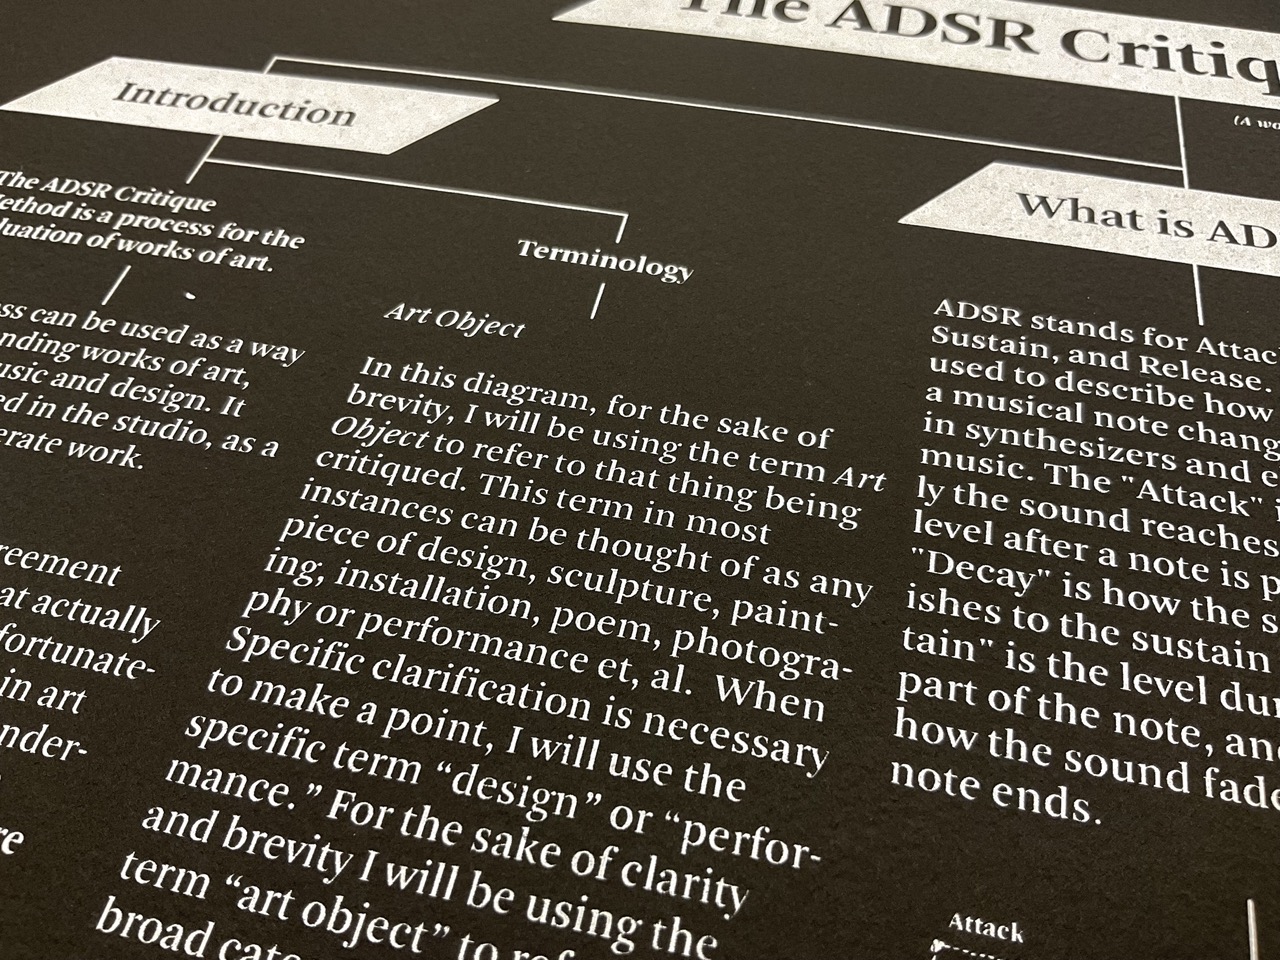 Detail View of “The ADSR Critique Method" By Elliott Earls 22" x 30" 1 Spot Color On Stonehenge Heavyweight 100% Cotton Black Paper Released March 18, 2022 Hand-Pulled Screenprint Edition of 50, Signed and Numbered by the Artist